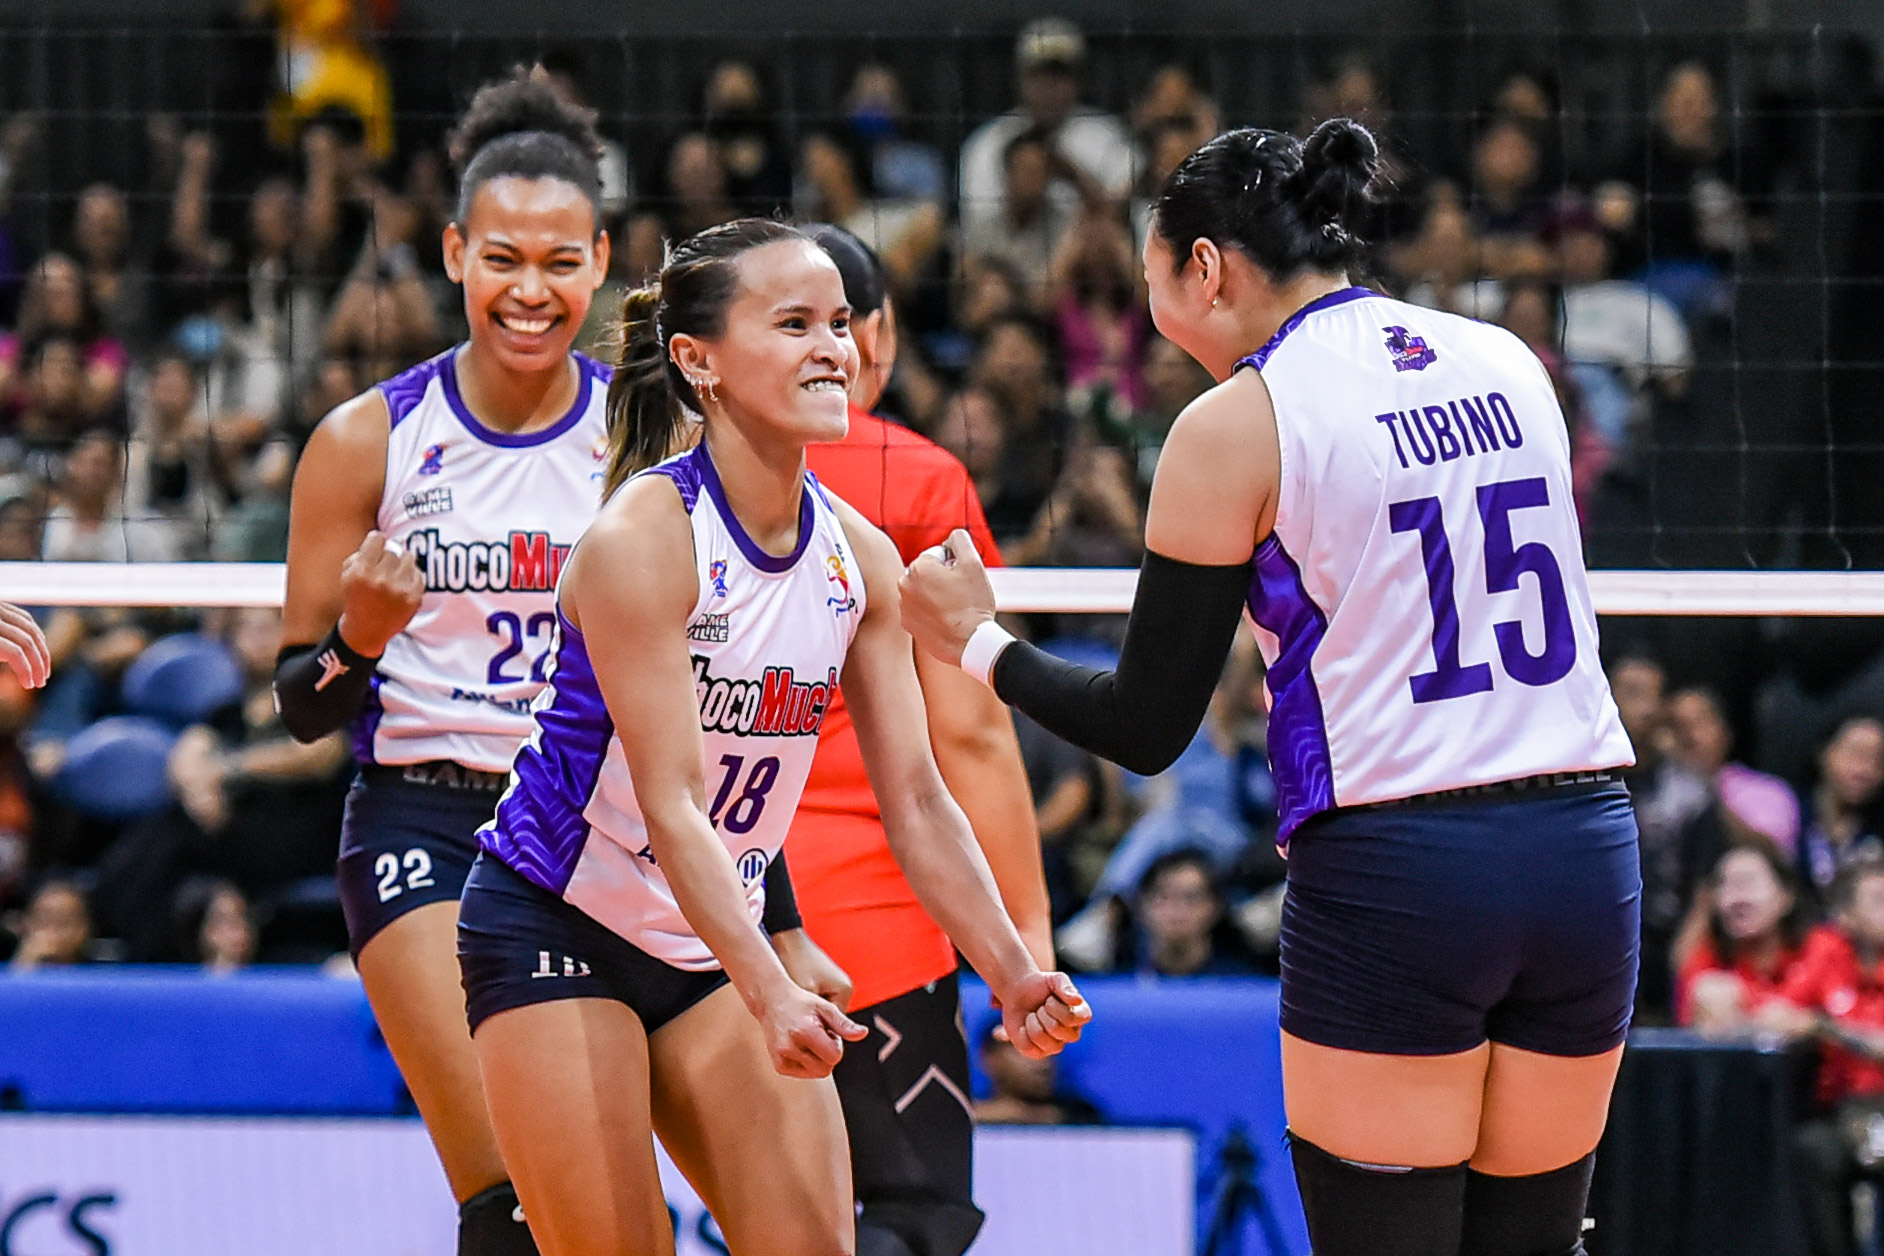 double celebration for sisi rondina as choco mucho, ust make finals